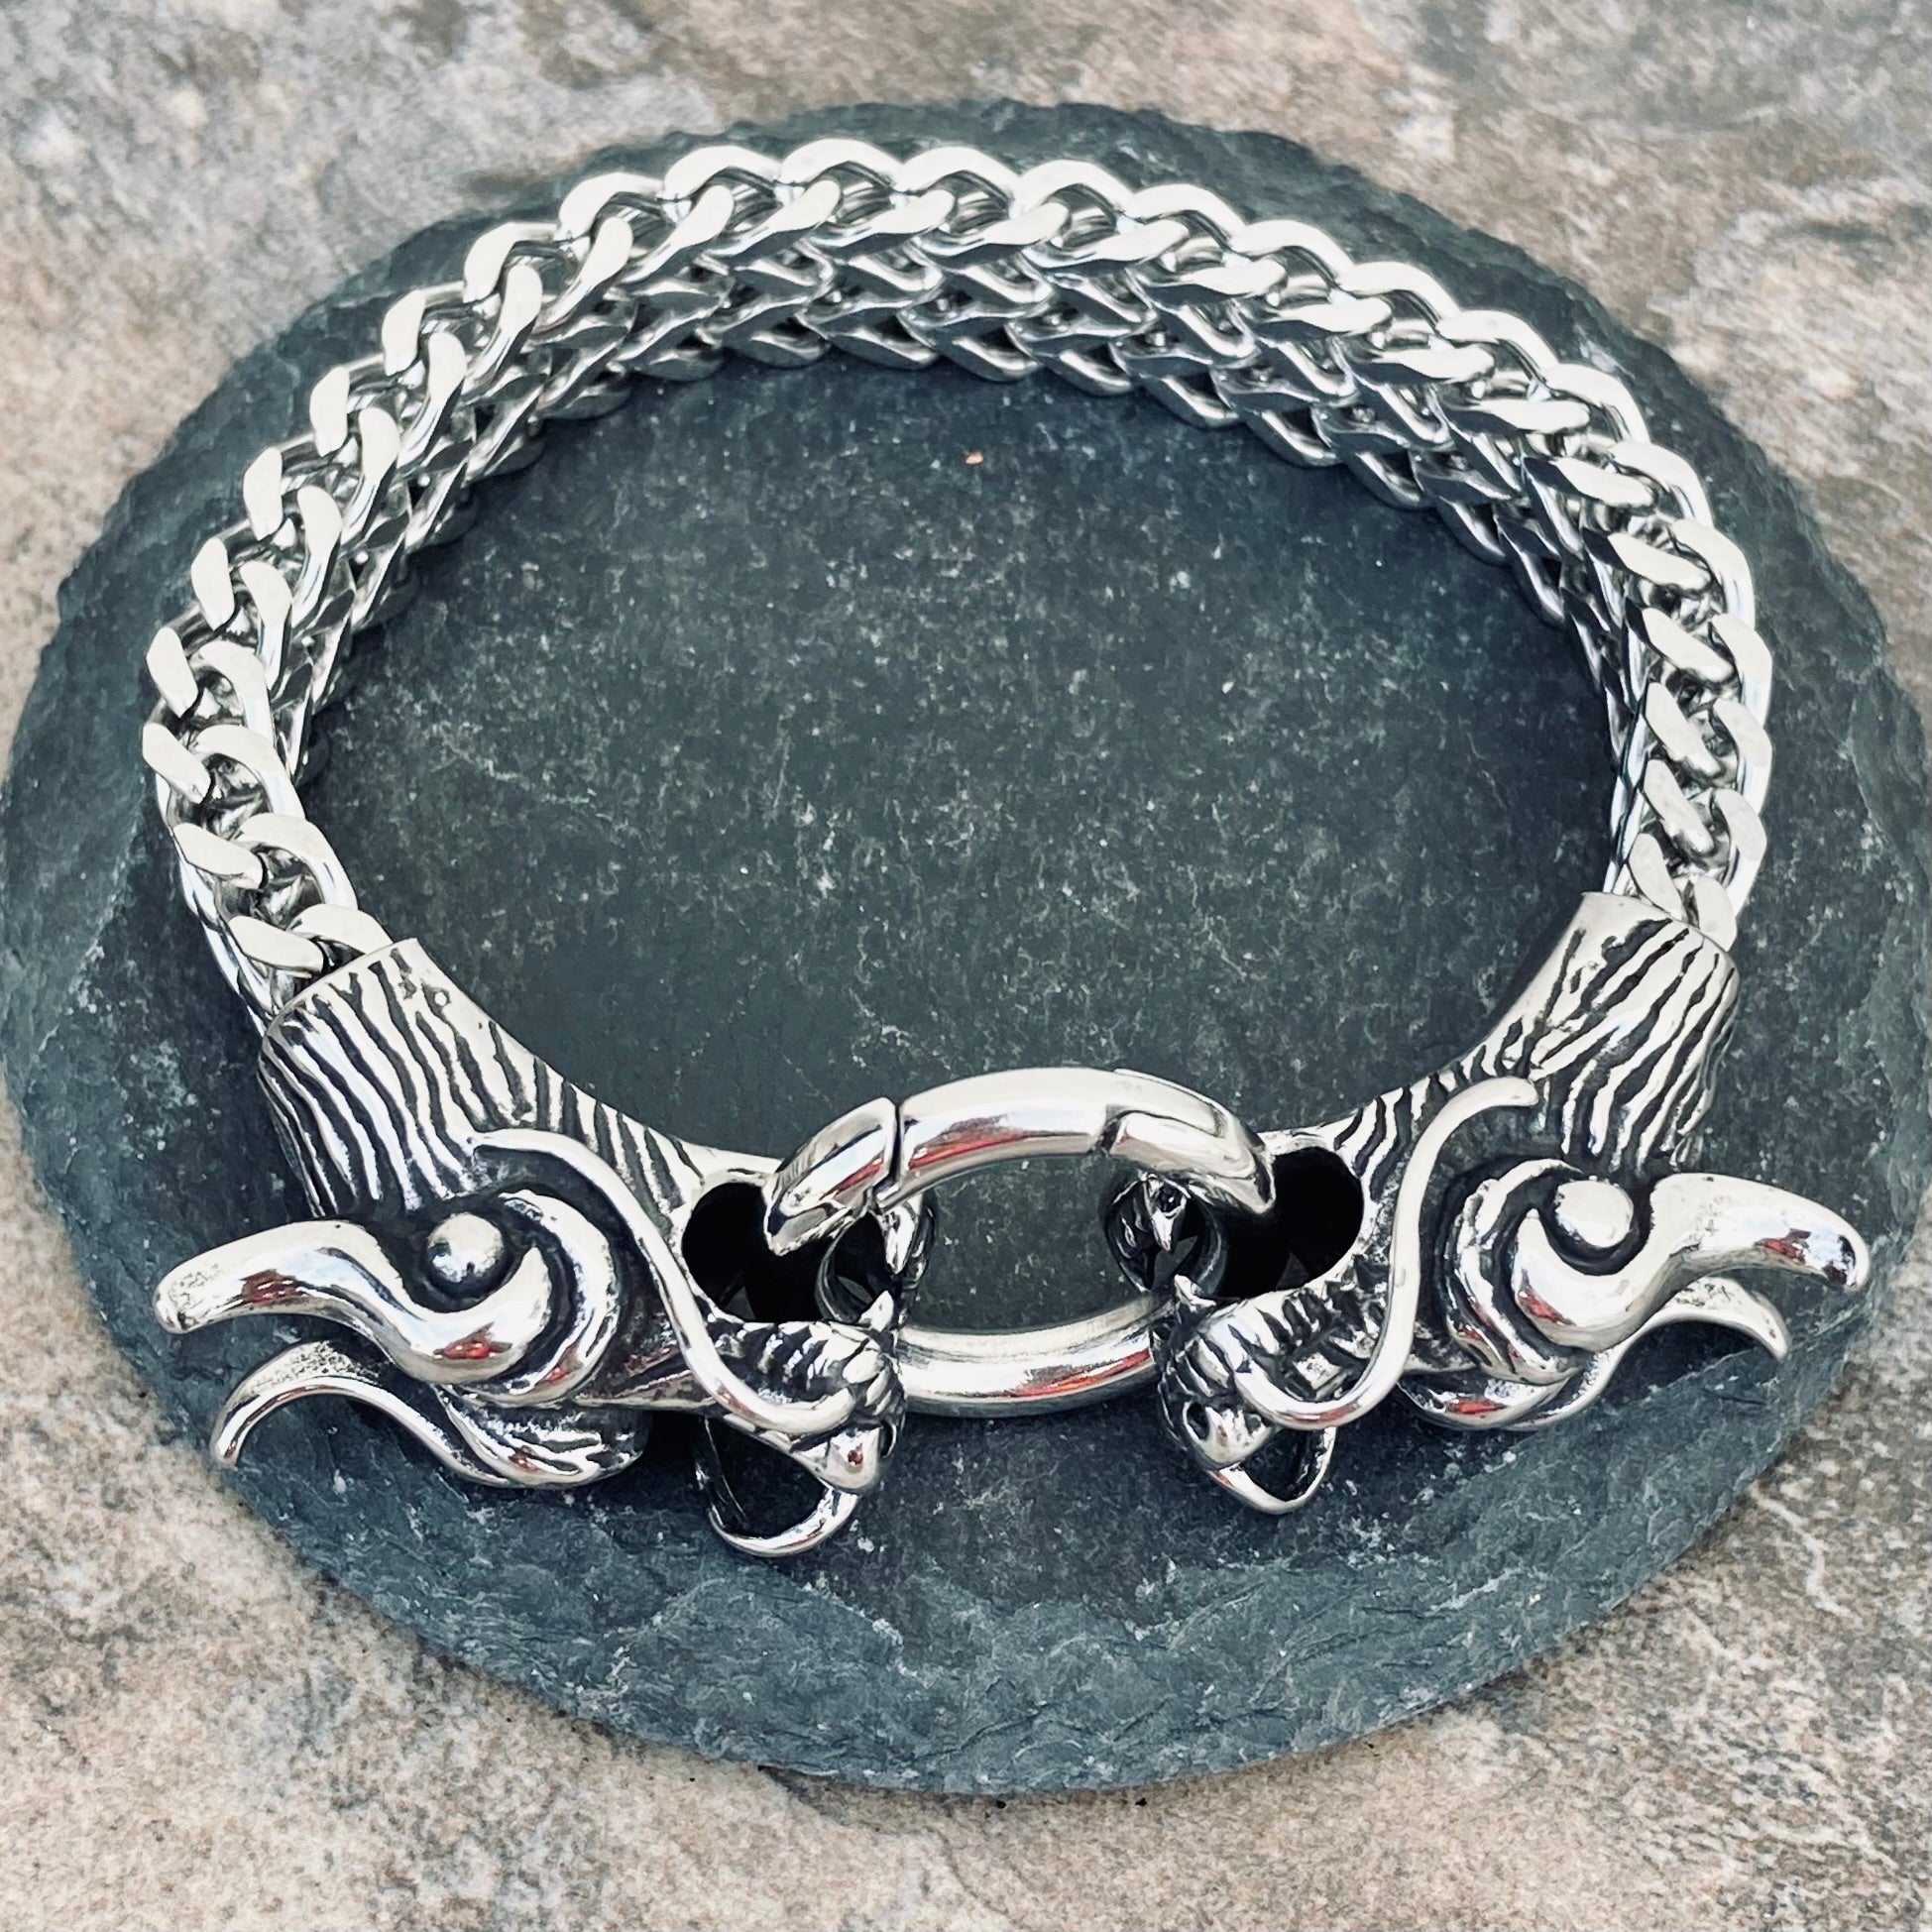 Viking King - Dragon Bracelet - The 2 Headed Great Smaug - B100 8.5 Inches